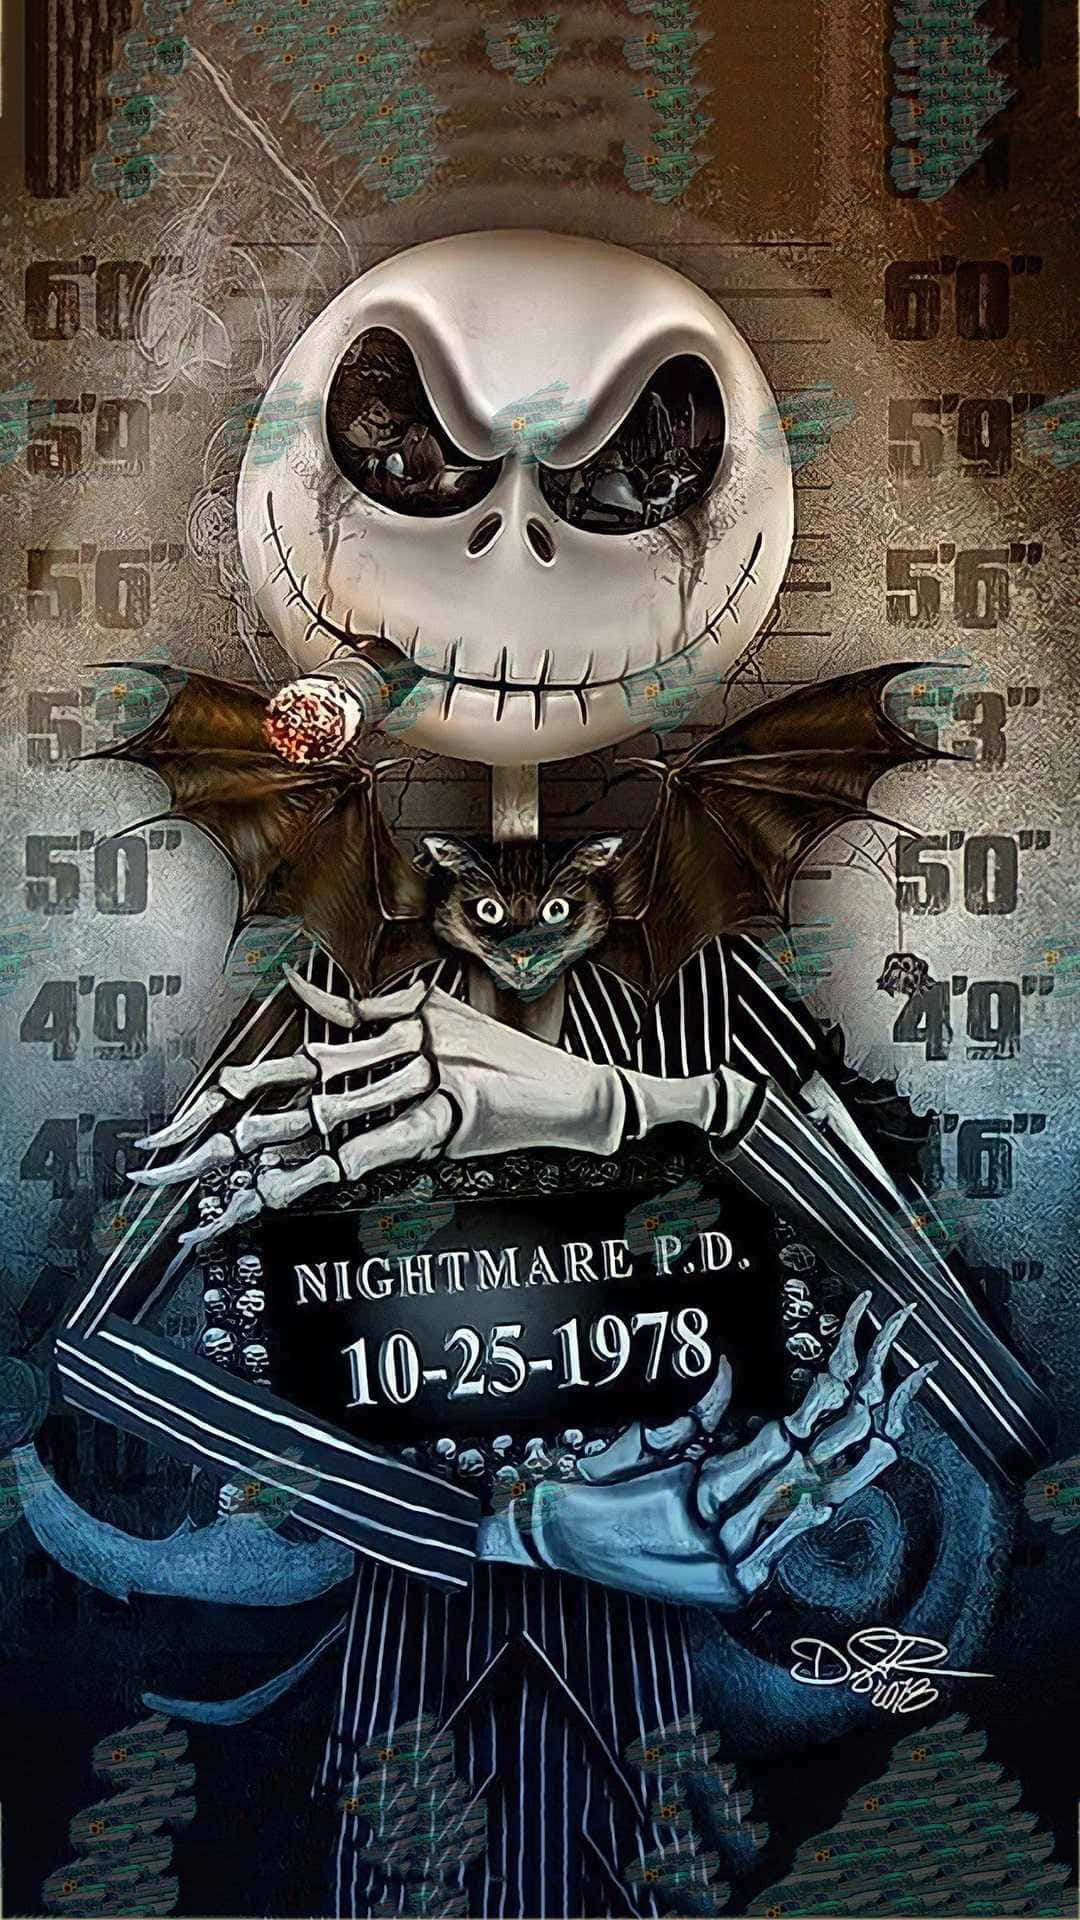 Be unique and show your love for the classic holiday traditions with this Nightmare Before Christmas Phone Wallpaper